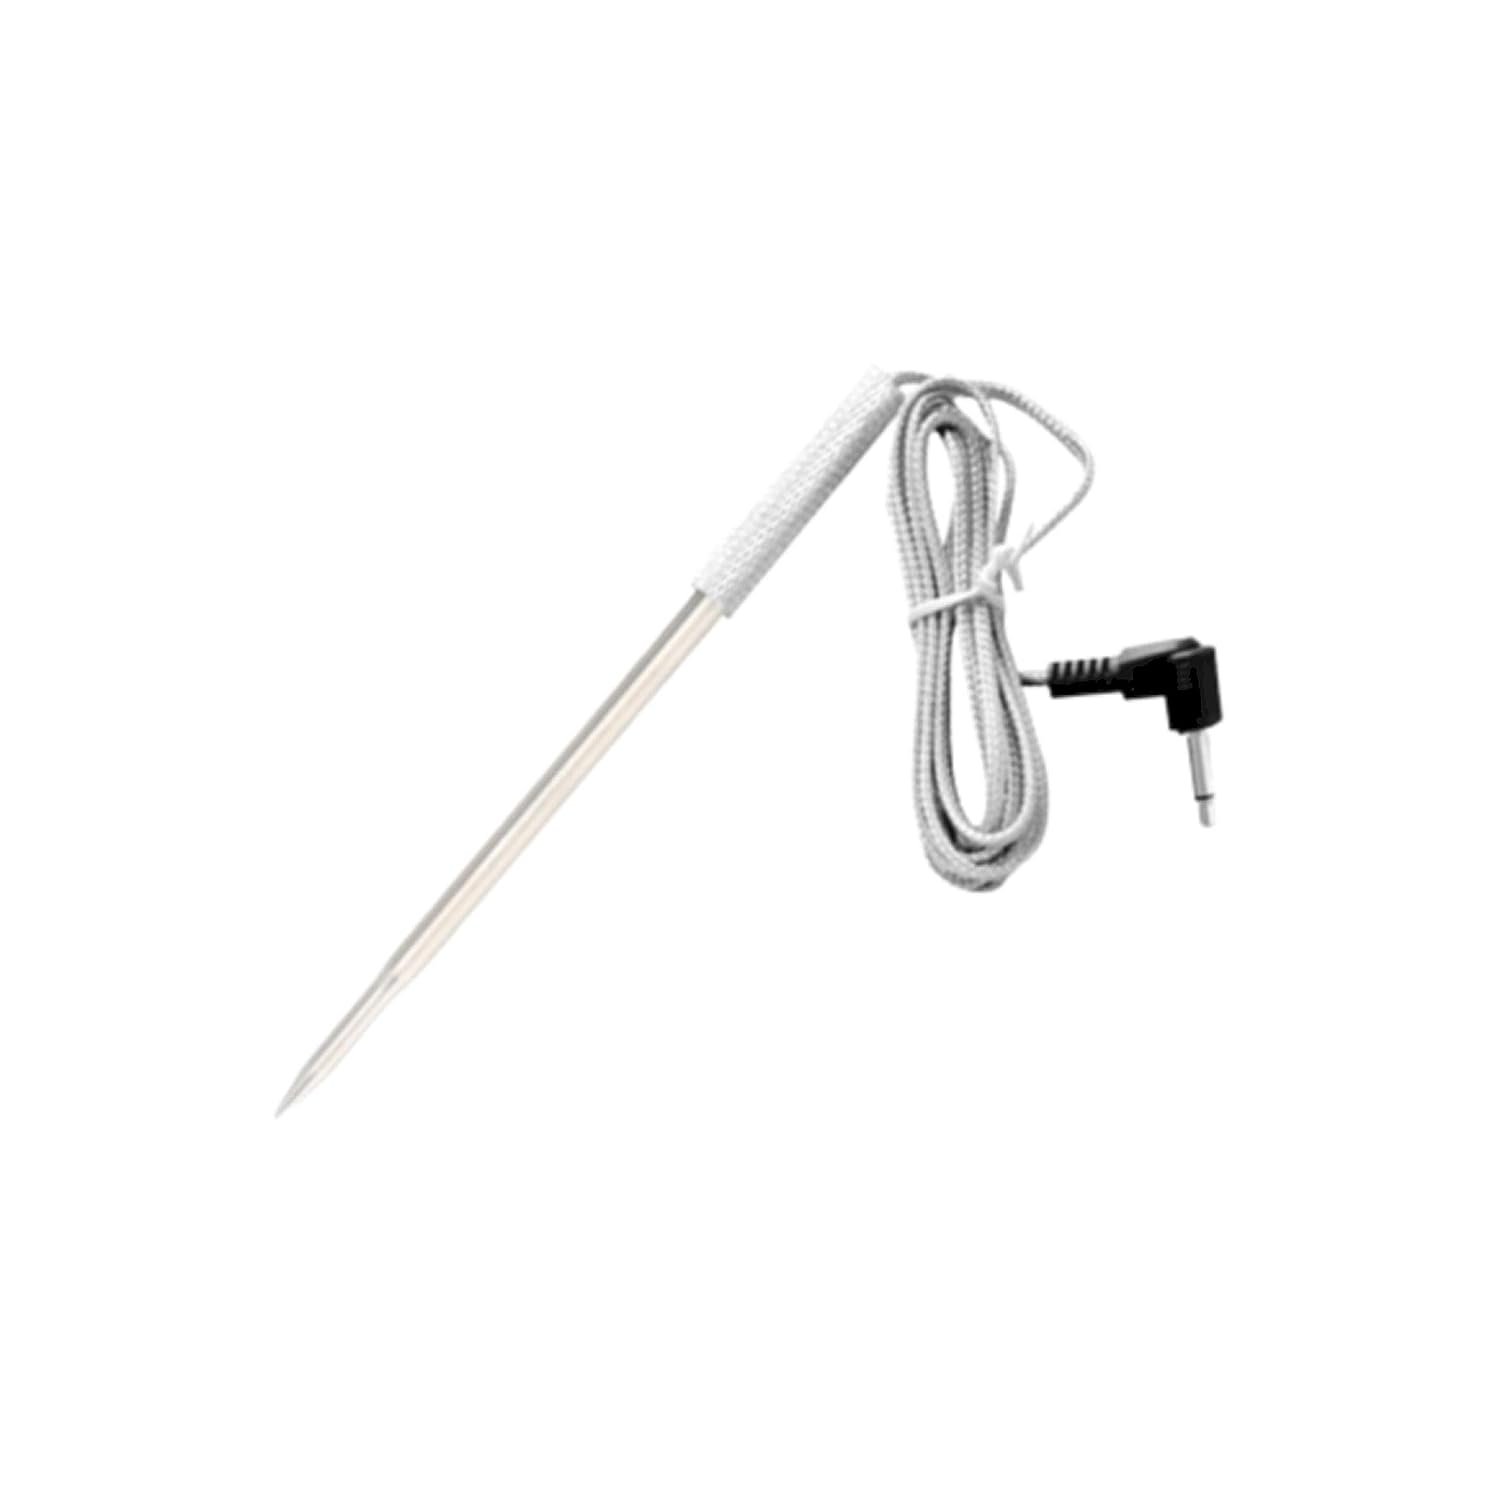 Replacement Probes for Cooking Thermometers – Home Sensors & Parts